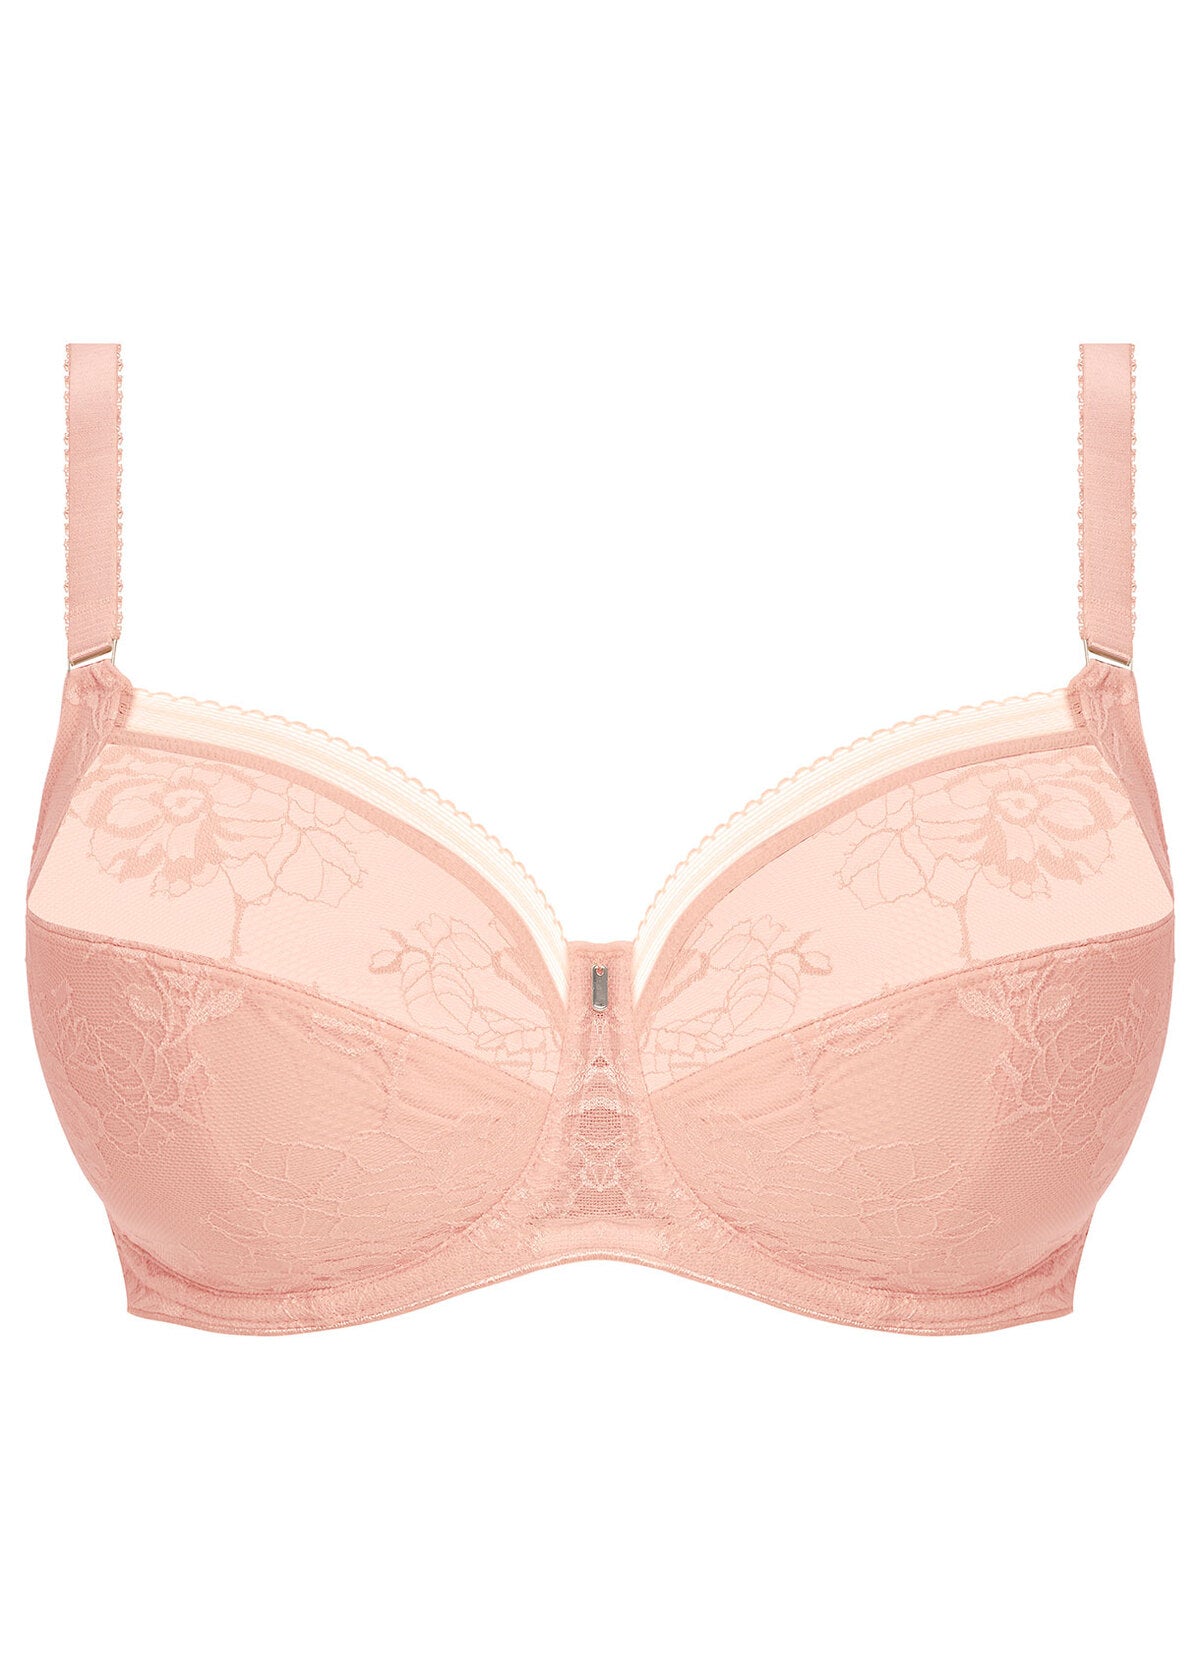 Fantasie Fusion Lace Full Cup Side Support Bra - Blush